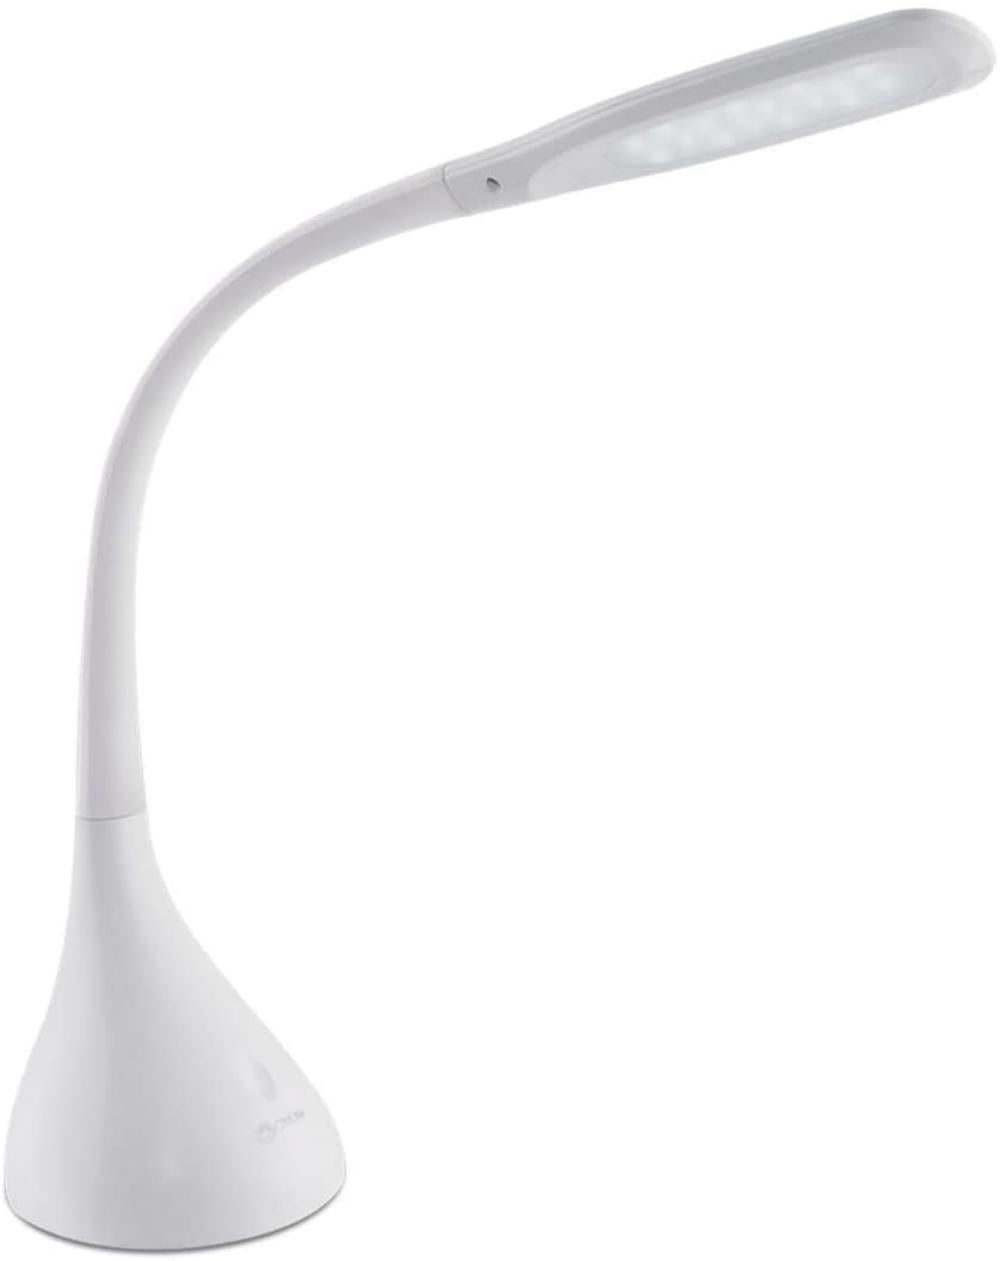 Dorm OttLite Creative Curves LED Desk Lamp Task Lamp Great for Home 4 Brightness Settings Table Lamp 2.1A USB Charging Port Sewing Table Office 